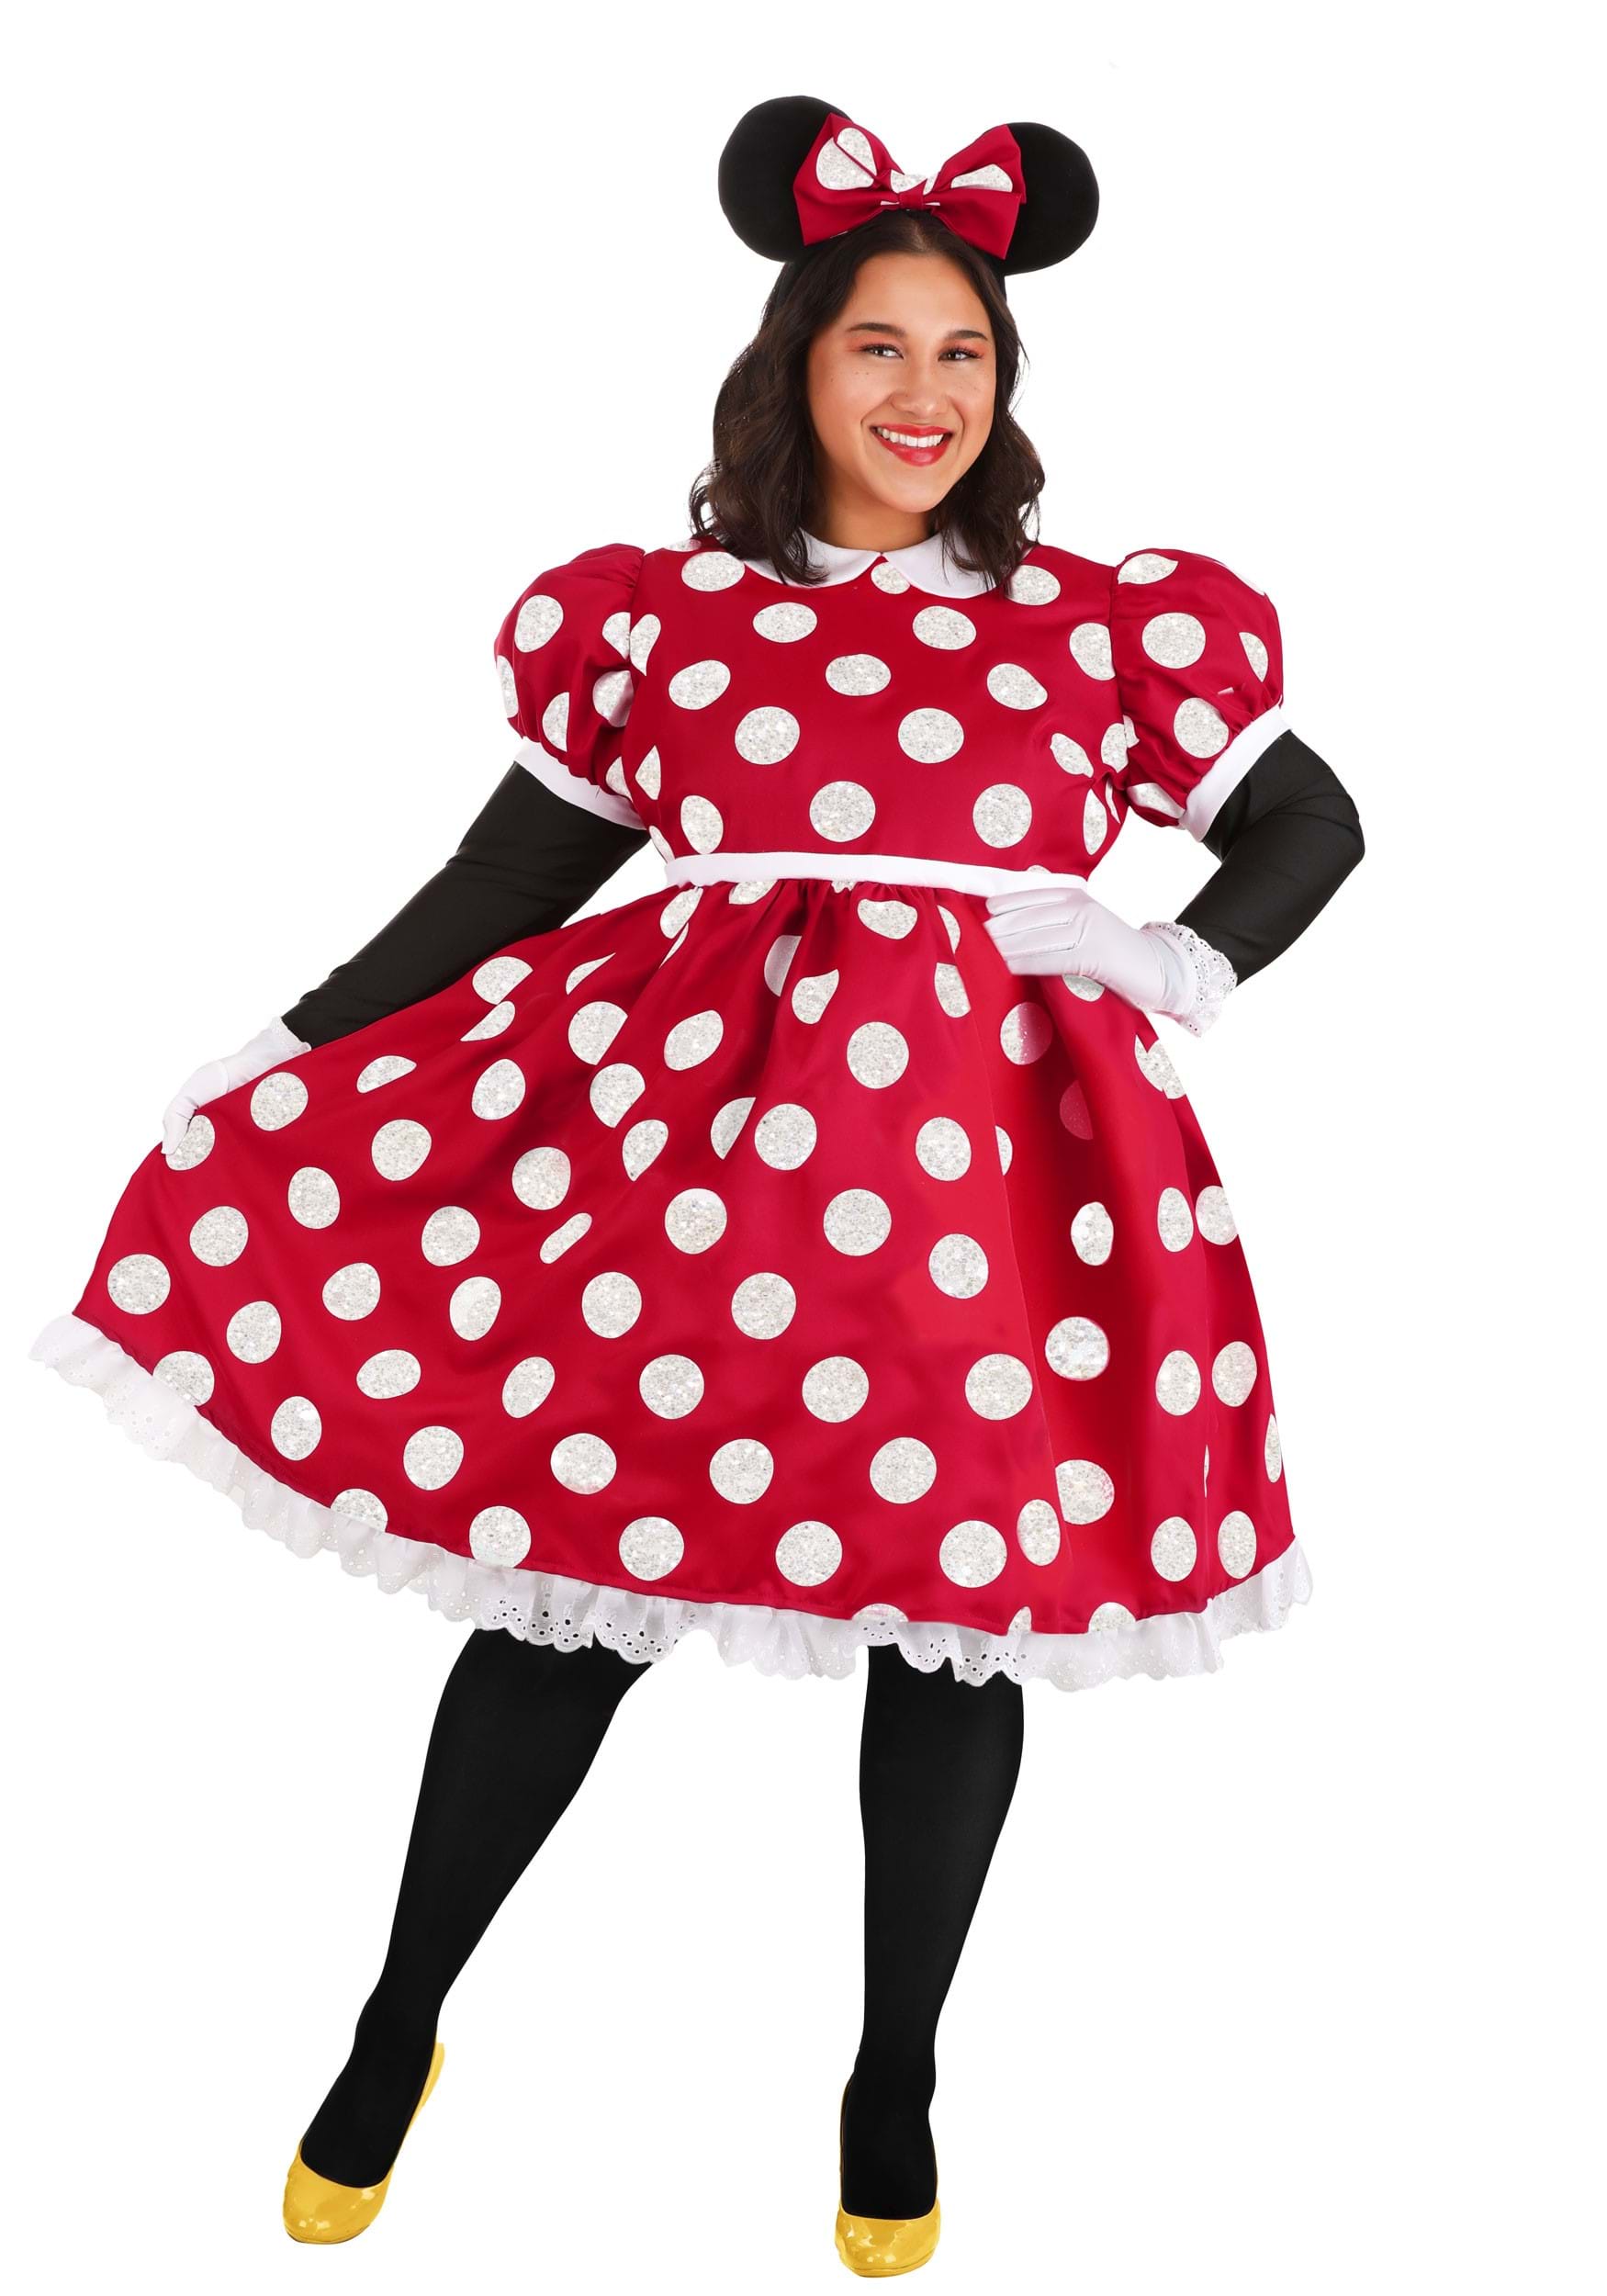 Plus Size Deluxe Minnie Mouse Costume for Women | Disney Costumes